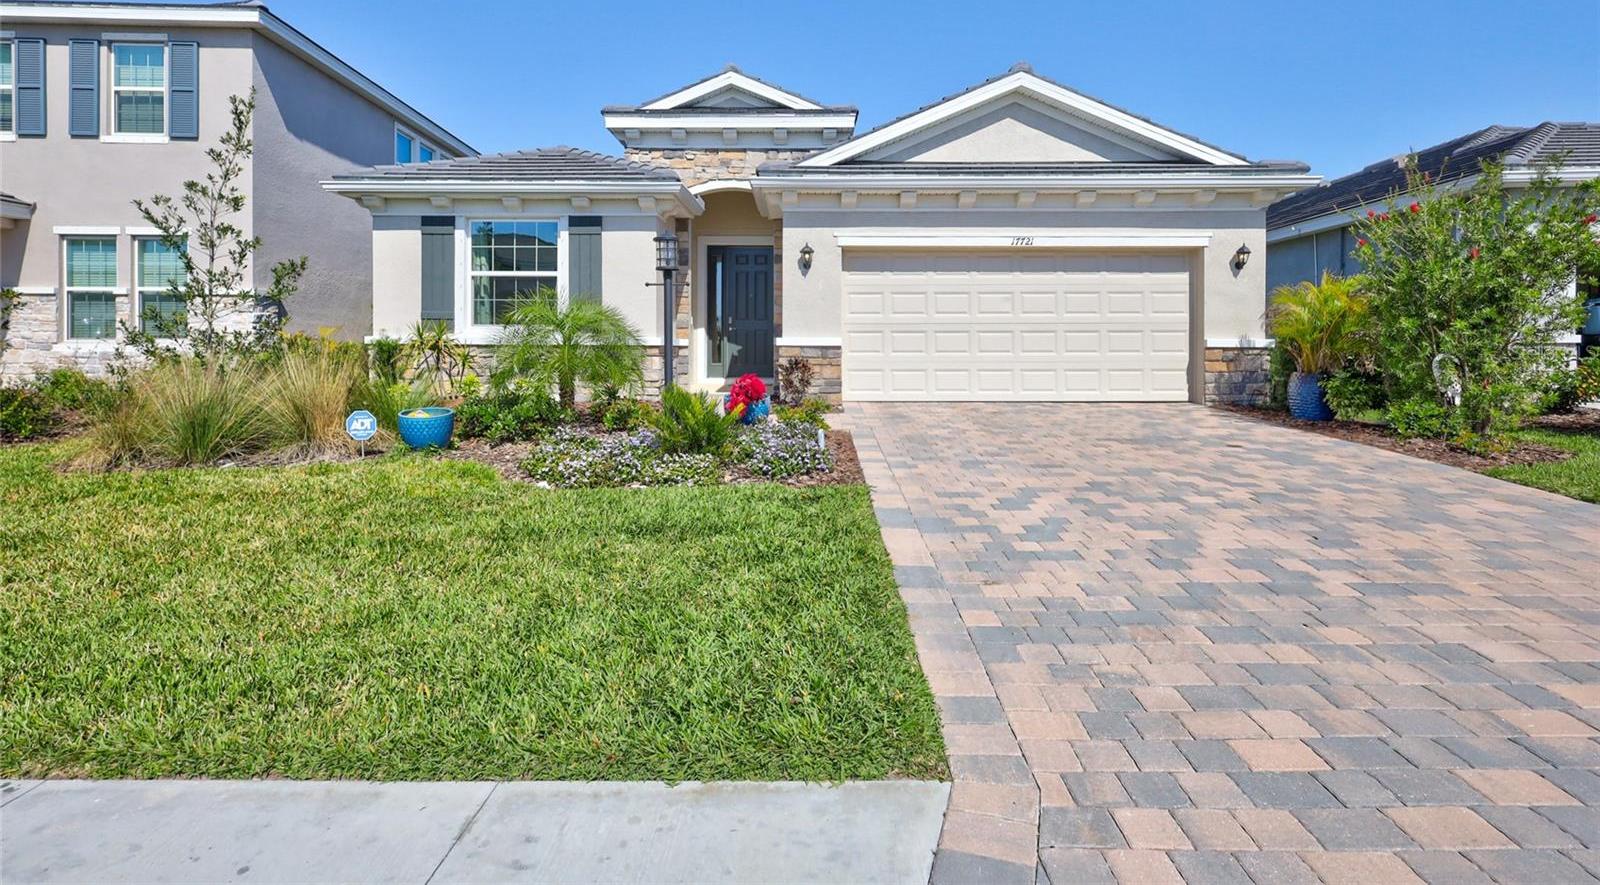 Photo one of 17721 Gulf Ranch Pl Lakewood Ranch FL 34211 | MLS A4601401